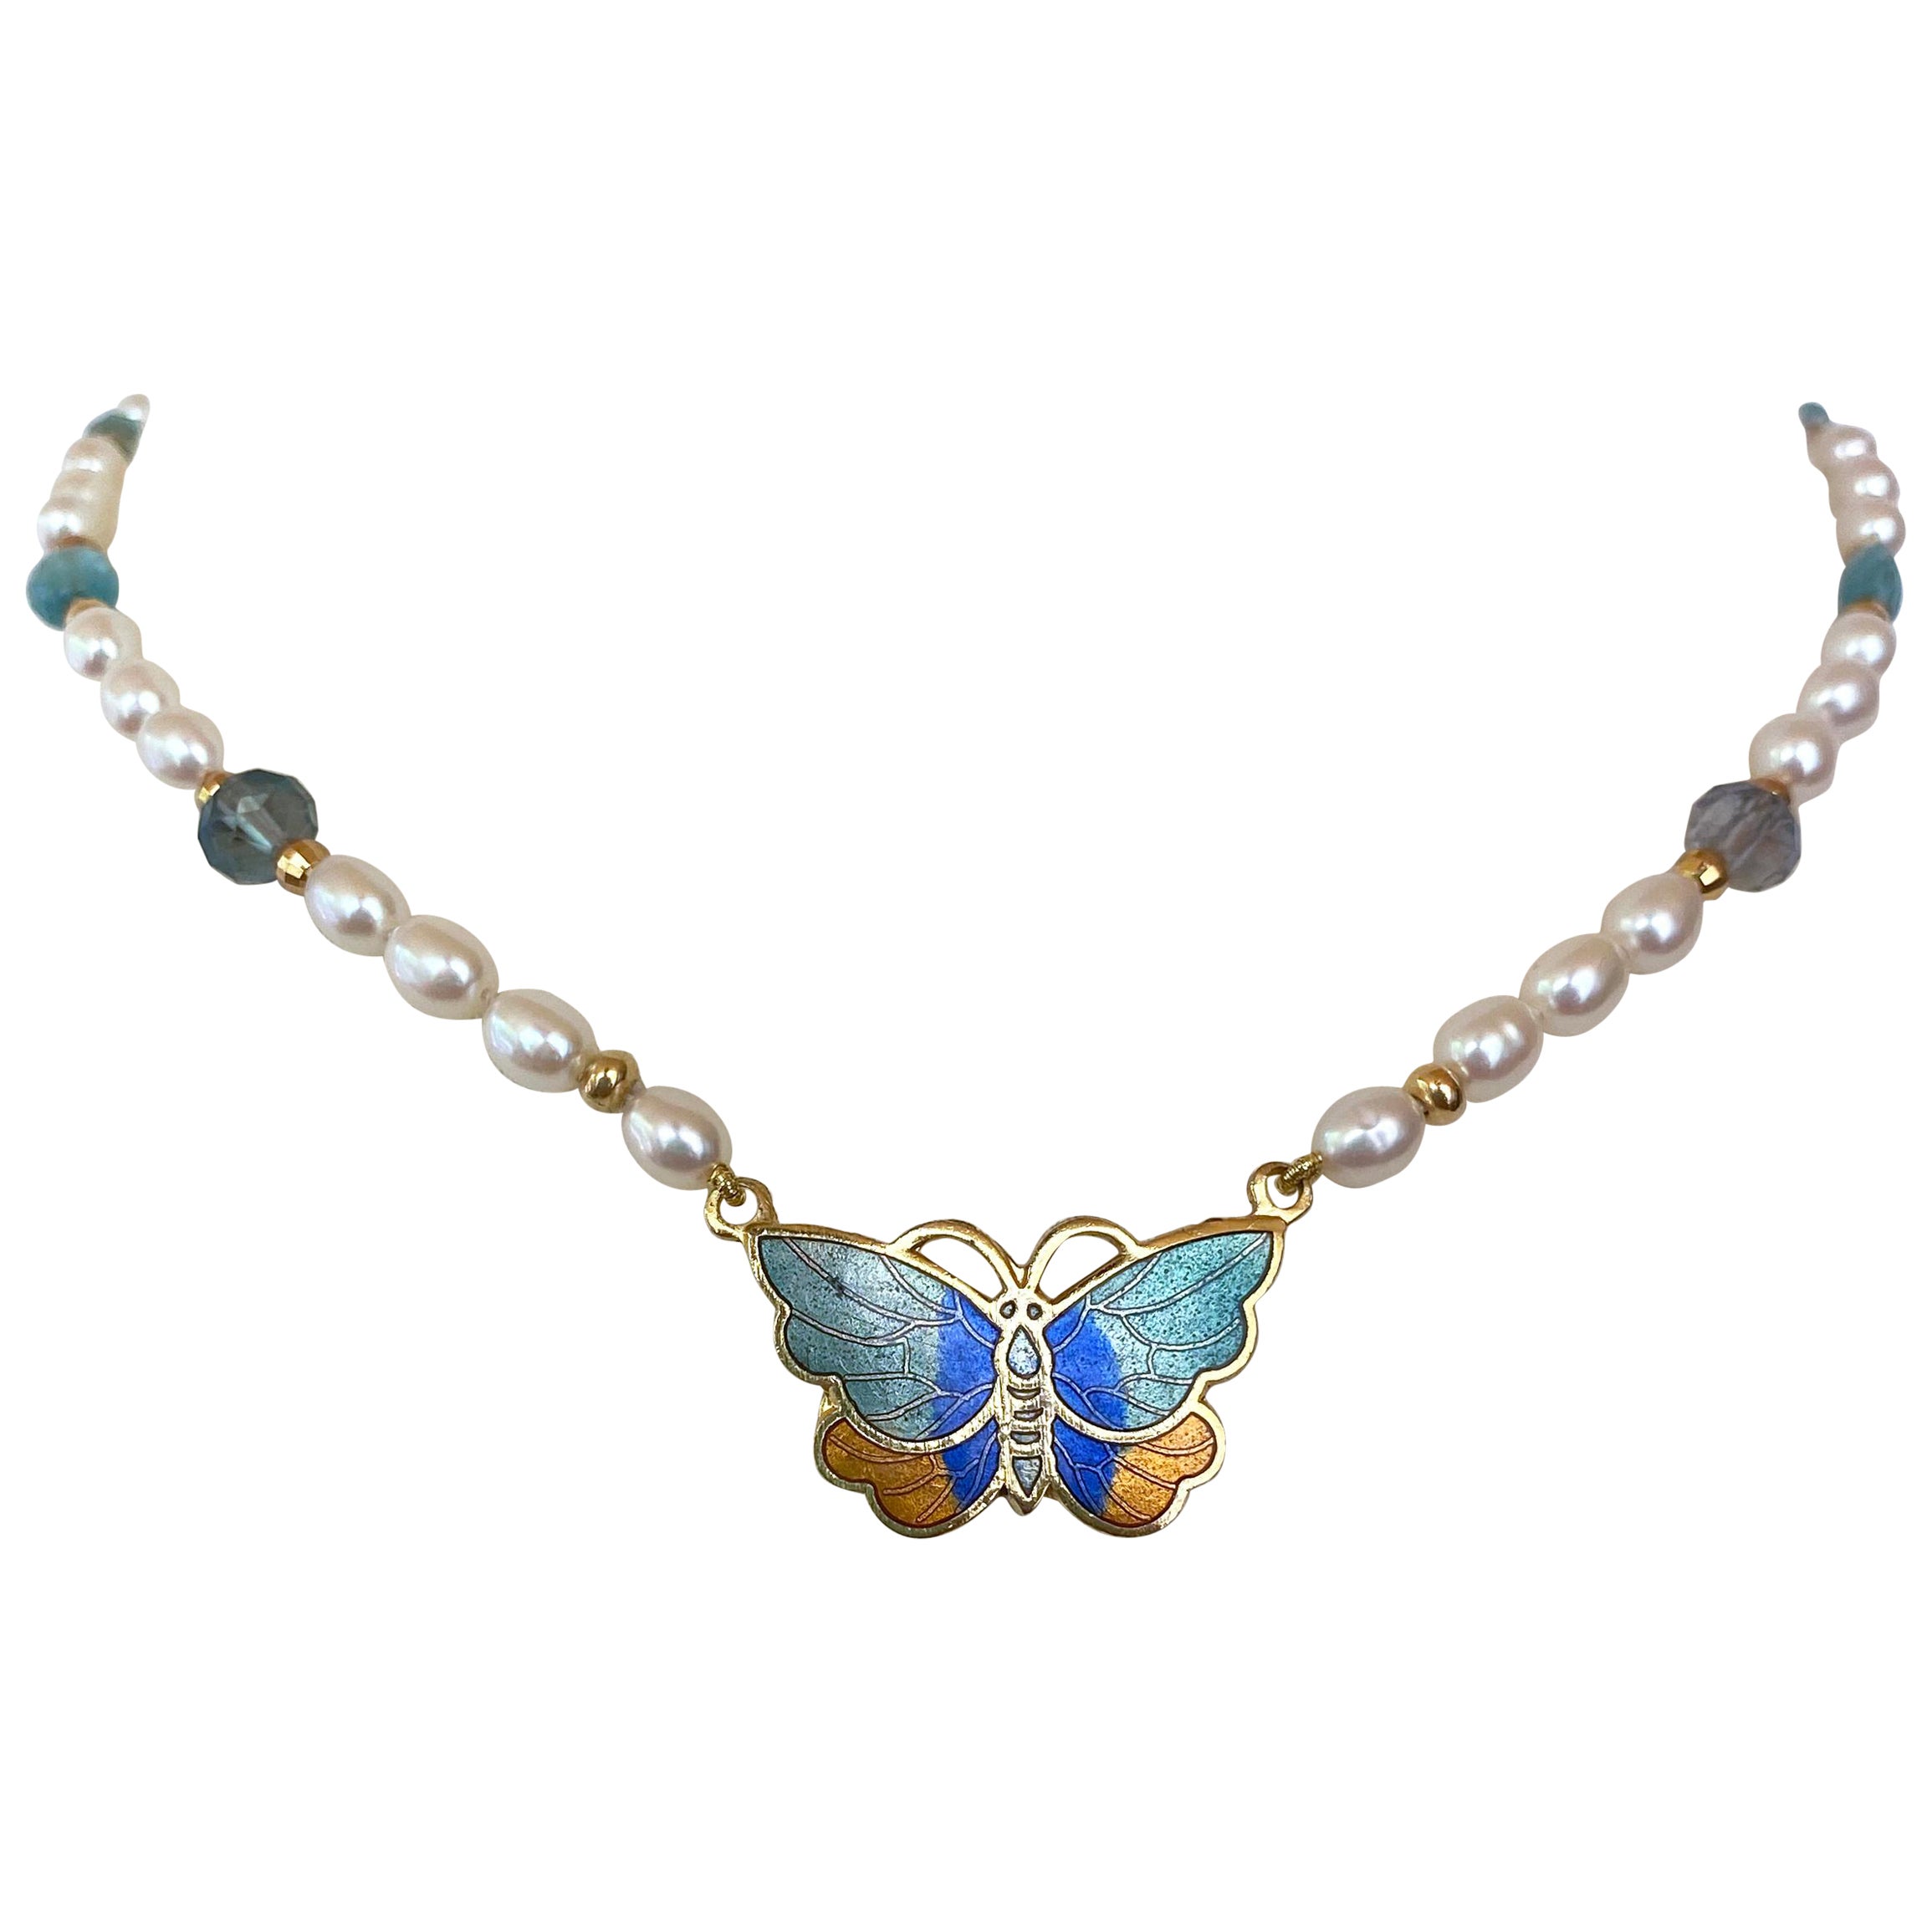 Marina J For Girls Pearl Necklace with Aquamarine & 18k Enameled Butterfly For Sale